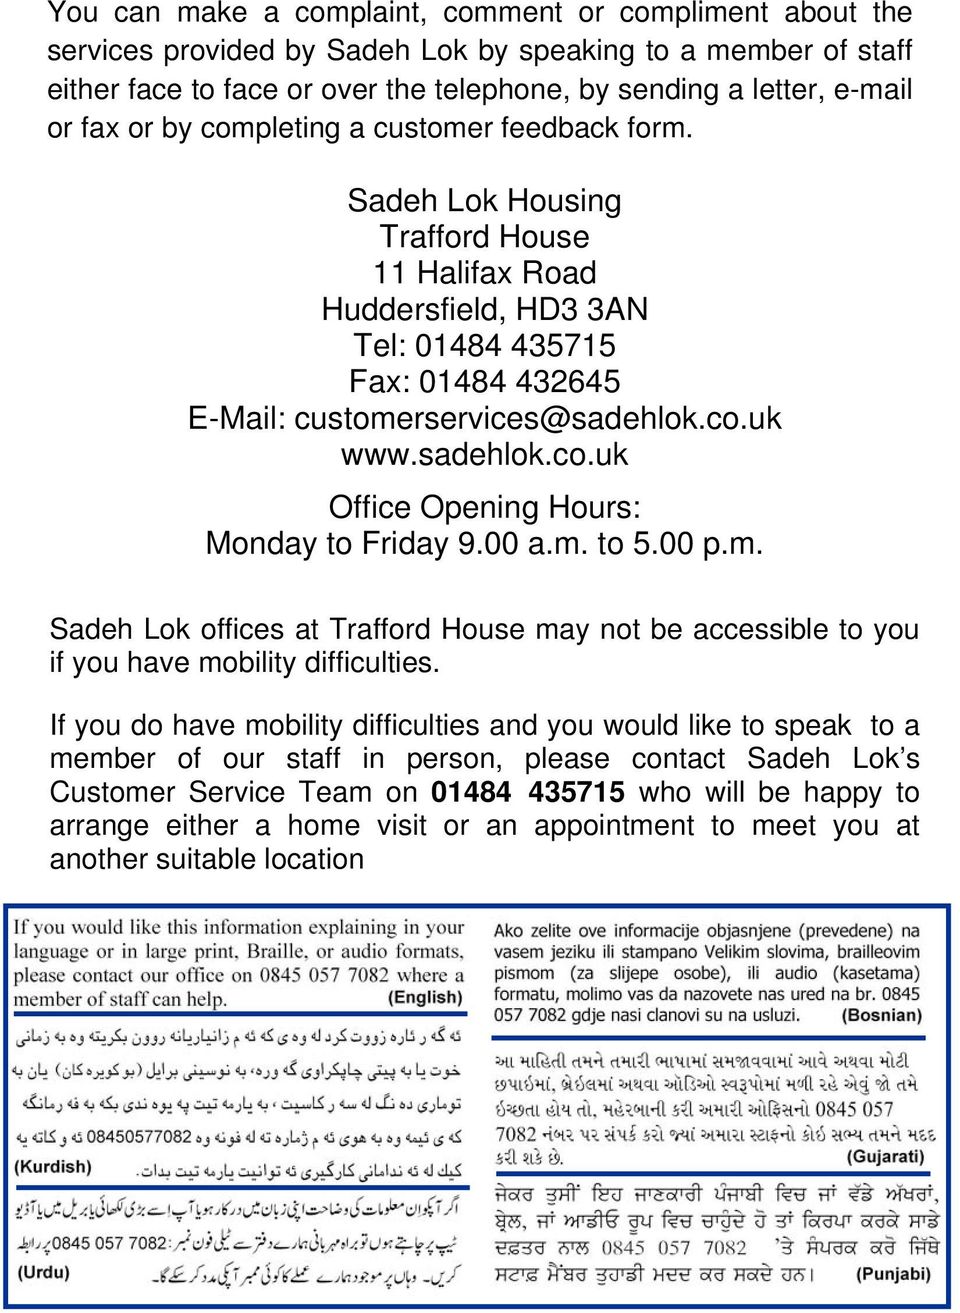 sadehlok.co.uk Office Opening Hours: Monday to Friday 9.00 a.m. to 5.00 p.m. Sadeh Lok offices at Trafford House may not be accessible to you if you have mobility difficulties.